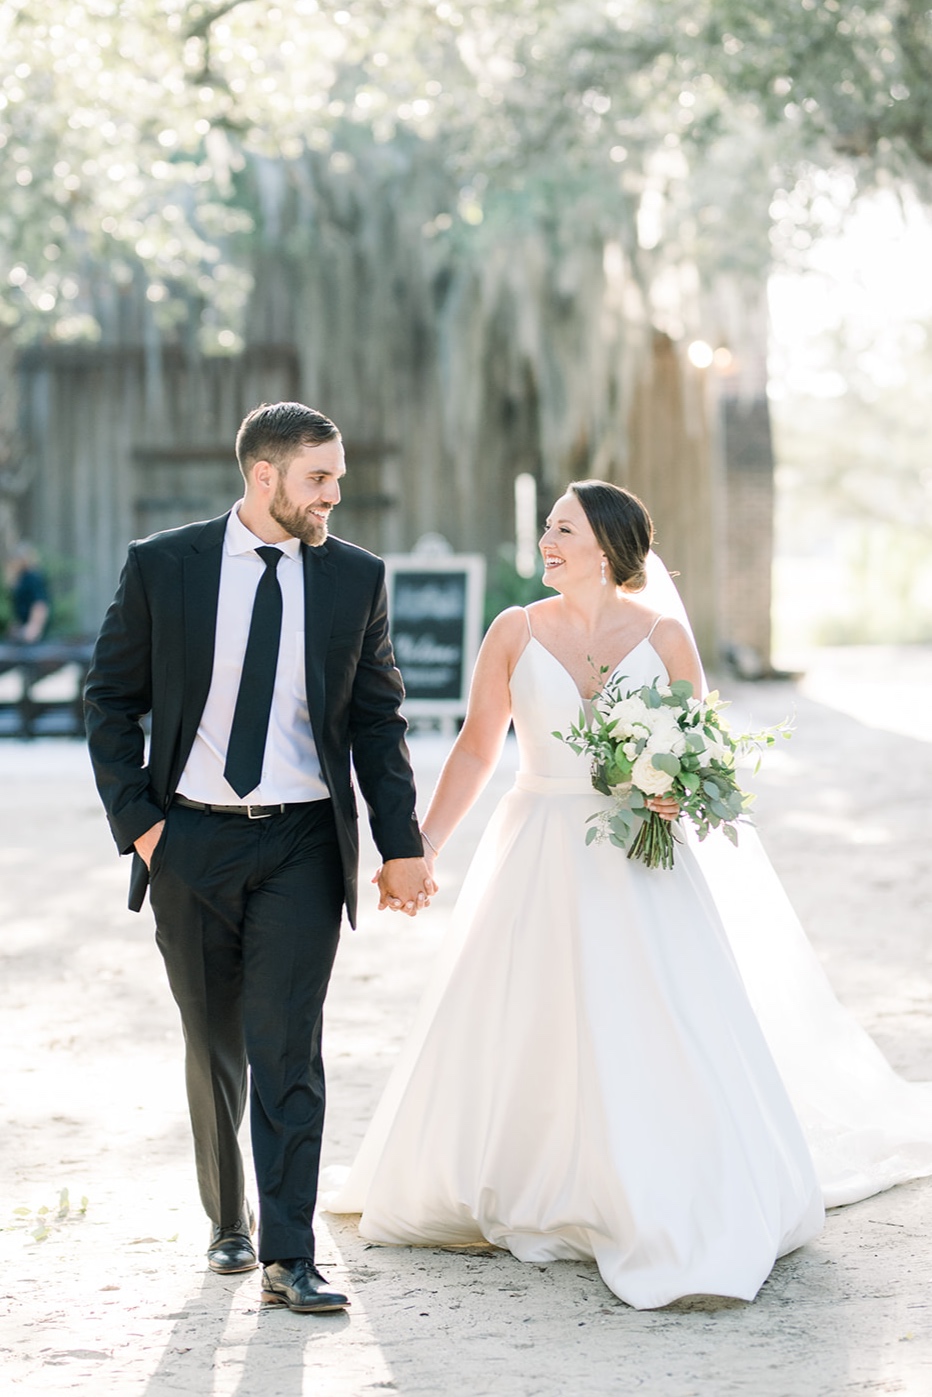  Brittany & Kyle at Boone Hall Plantation on July 20th, 2019. Photo by Audrey Rose Photography 